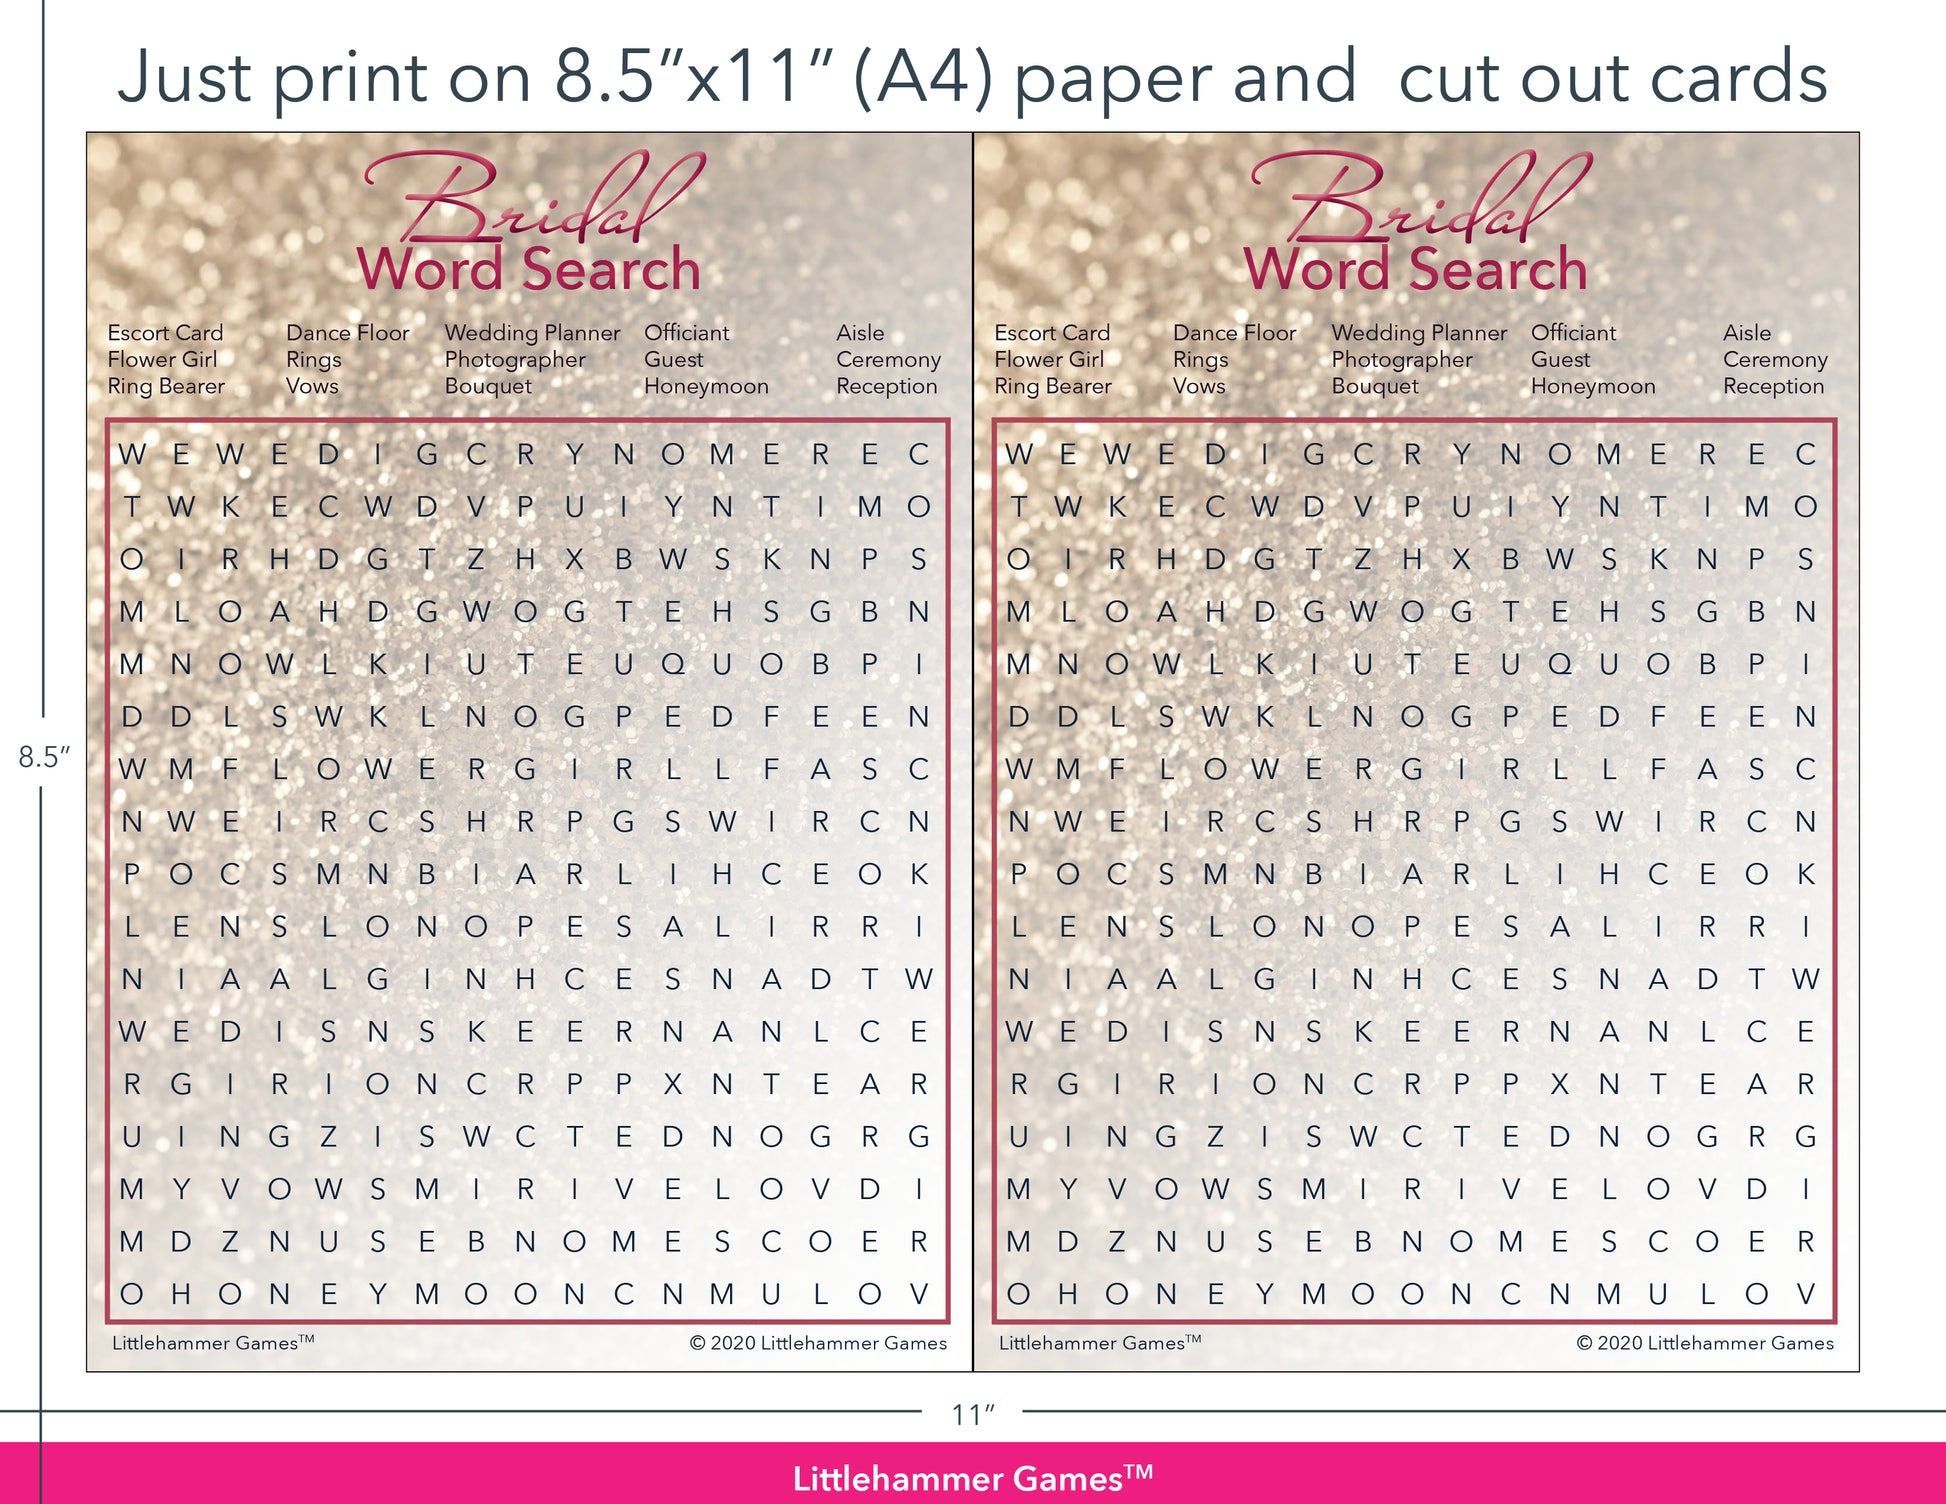 Bridal Word Search glittery rose gold game cards with printing instructions